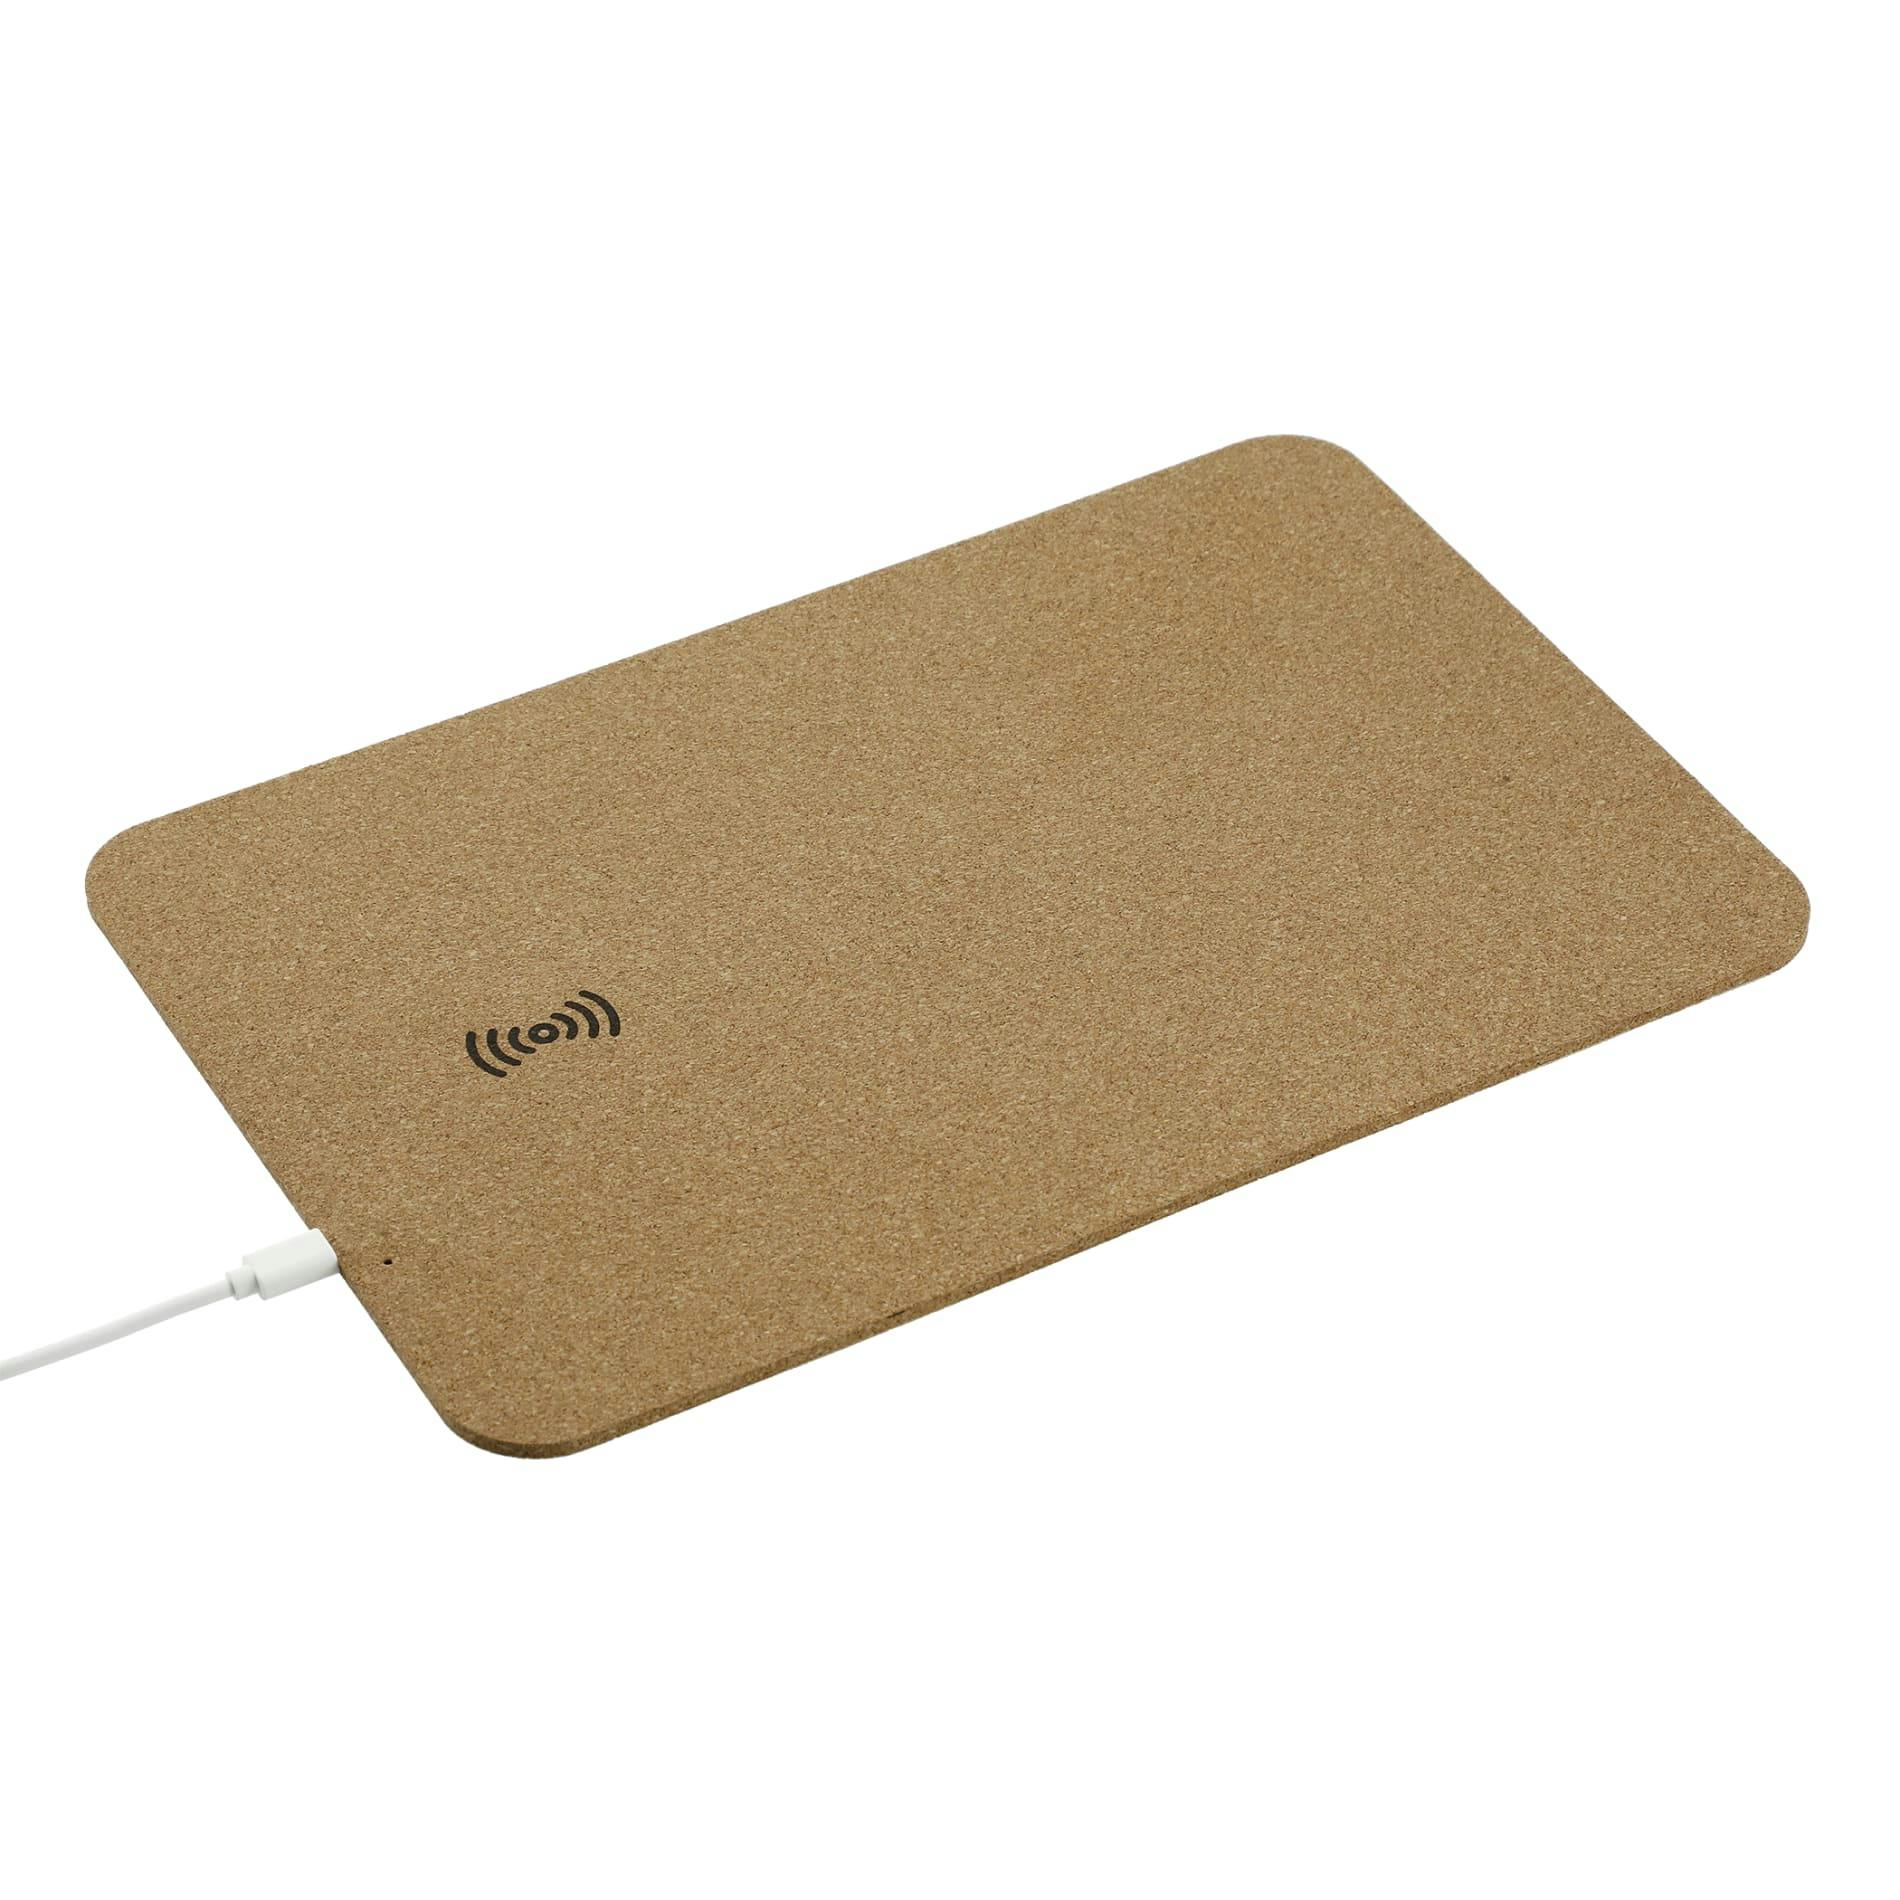 Cork Fast Wireless Charging Mouse Pad - additional Image 3